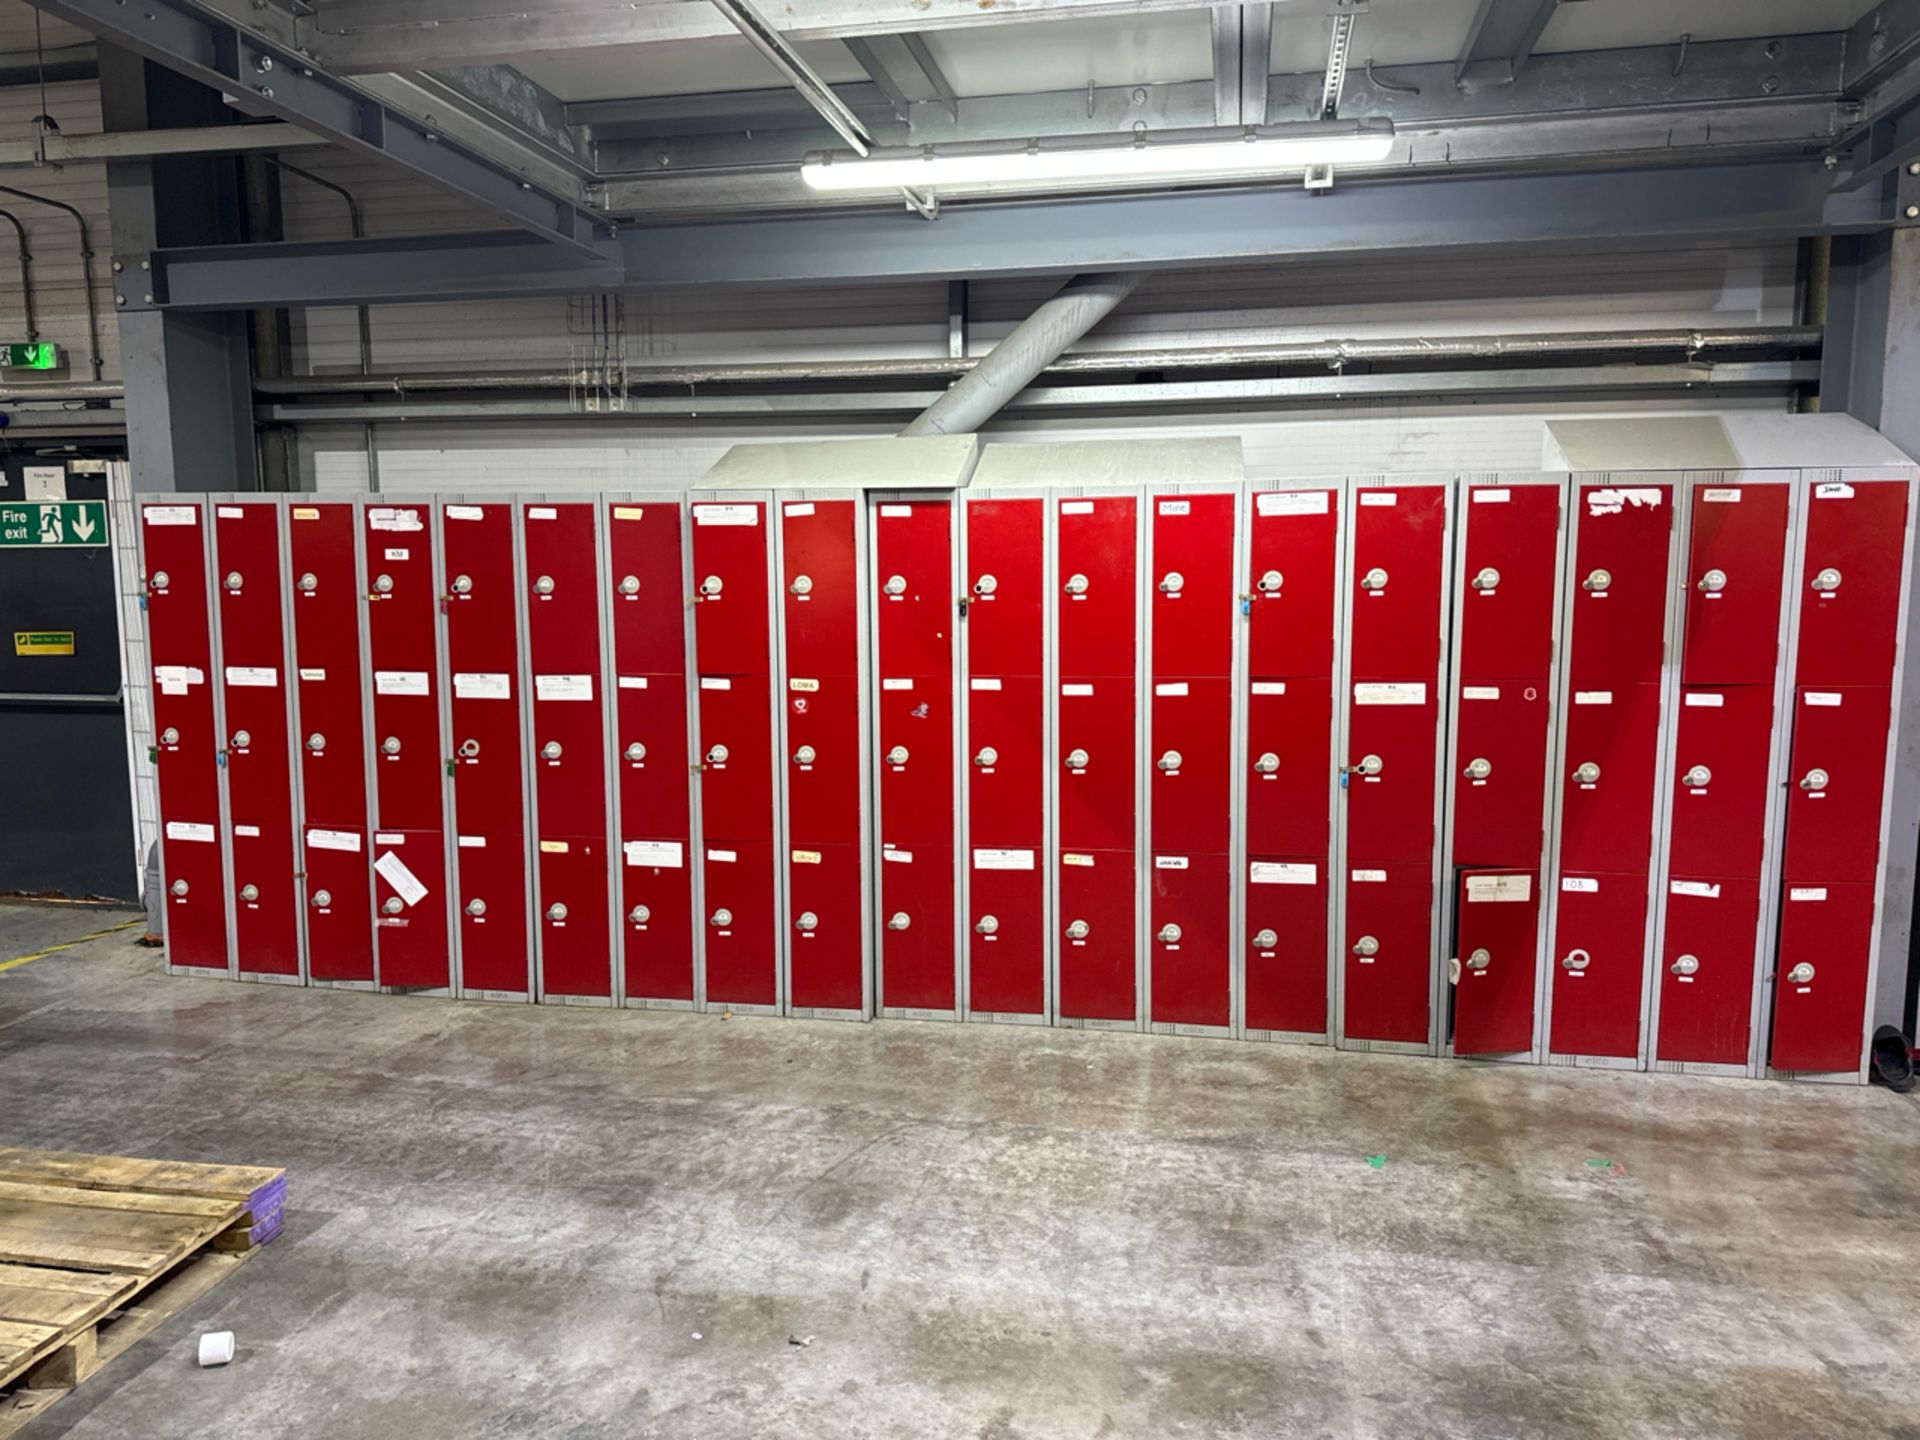 A Run Of 19 Sets Of Lockers